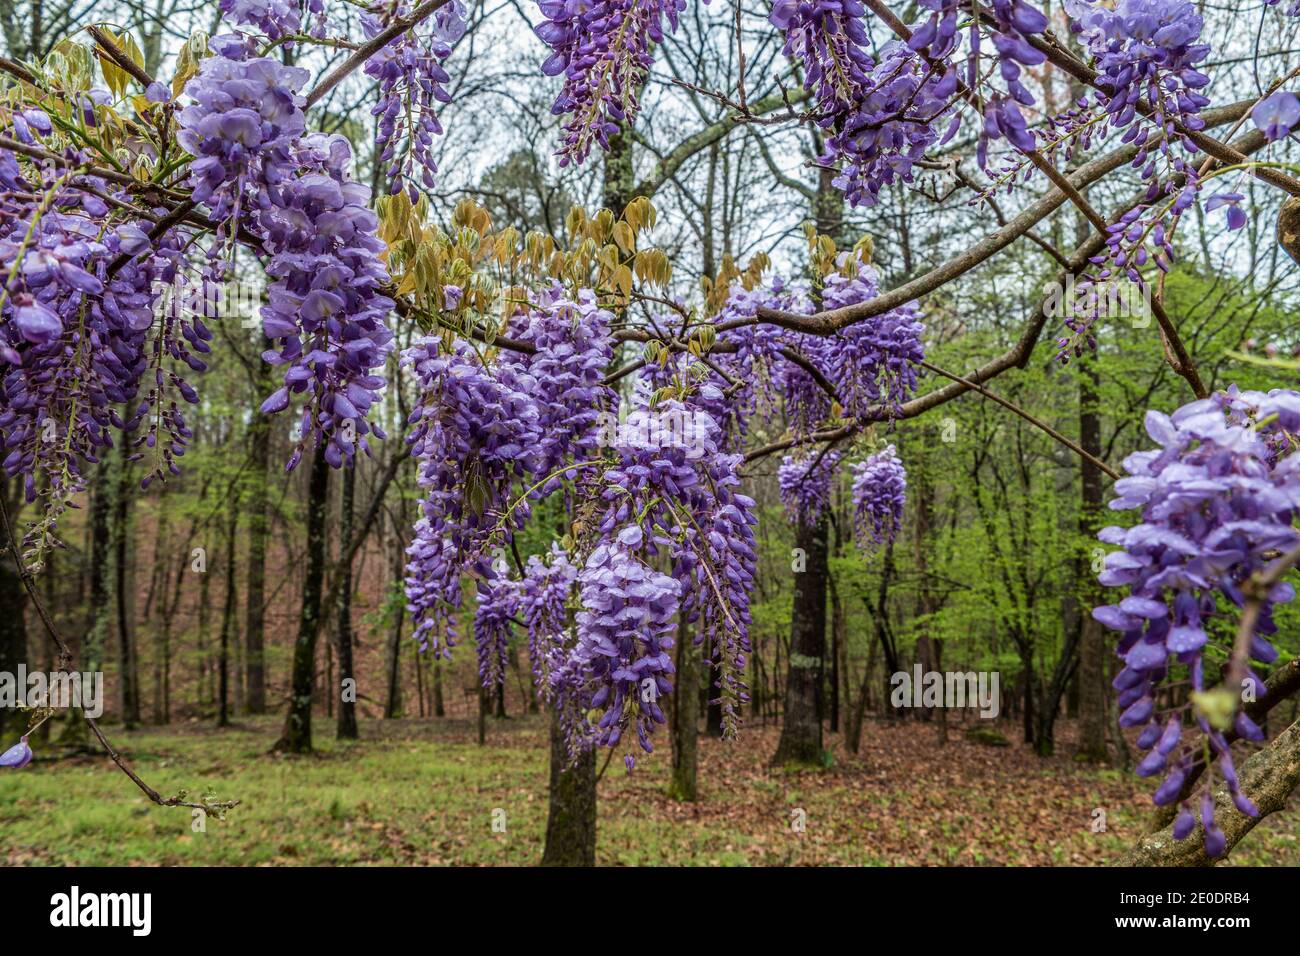 Looking through the blooming purple wisteria flowers hanging on a vine with the woodlands in the background on a cloudy day after the rain in springti Stock Photo